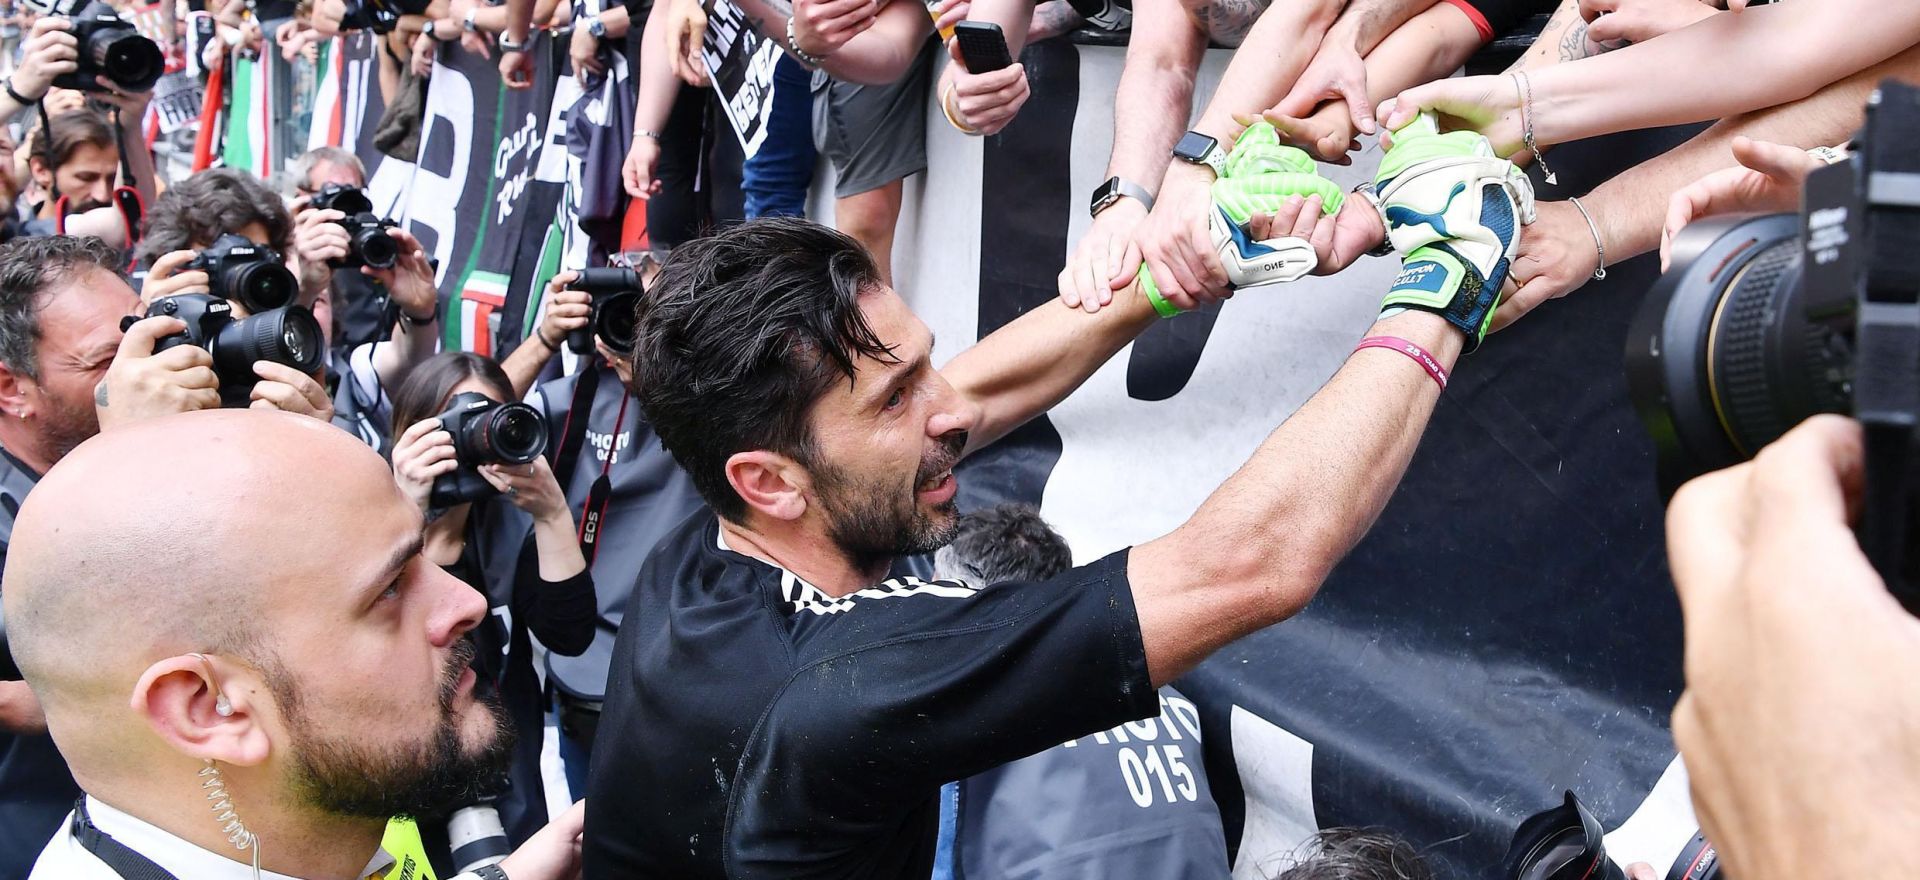 epa06749589 Juventus's Gianluigi Buffon greets the supporters during his last Italian Serie A soccer match with Juventus FC vs Hellas Verona FC at Allianz Stadium in Turin, Italy, 19 May 2018. Buffon has announced that he will leave the club at the end of the season.  EPA/ALESSANDRO DI MARCO